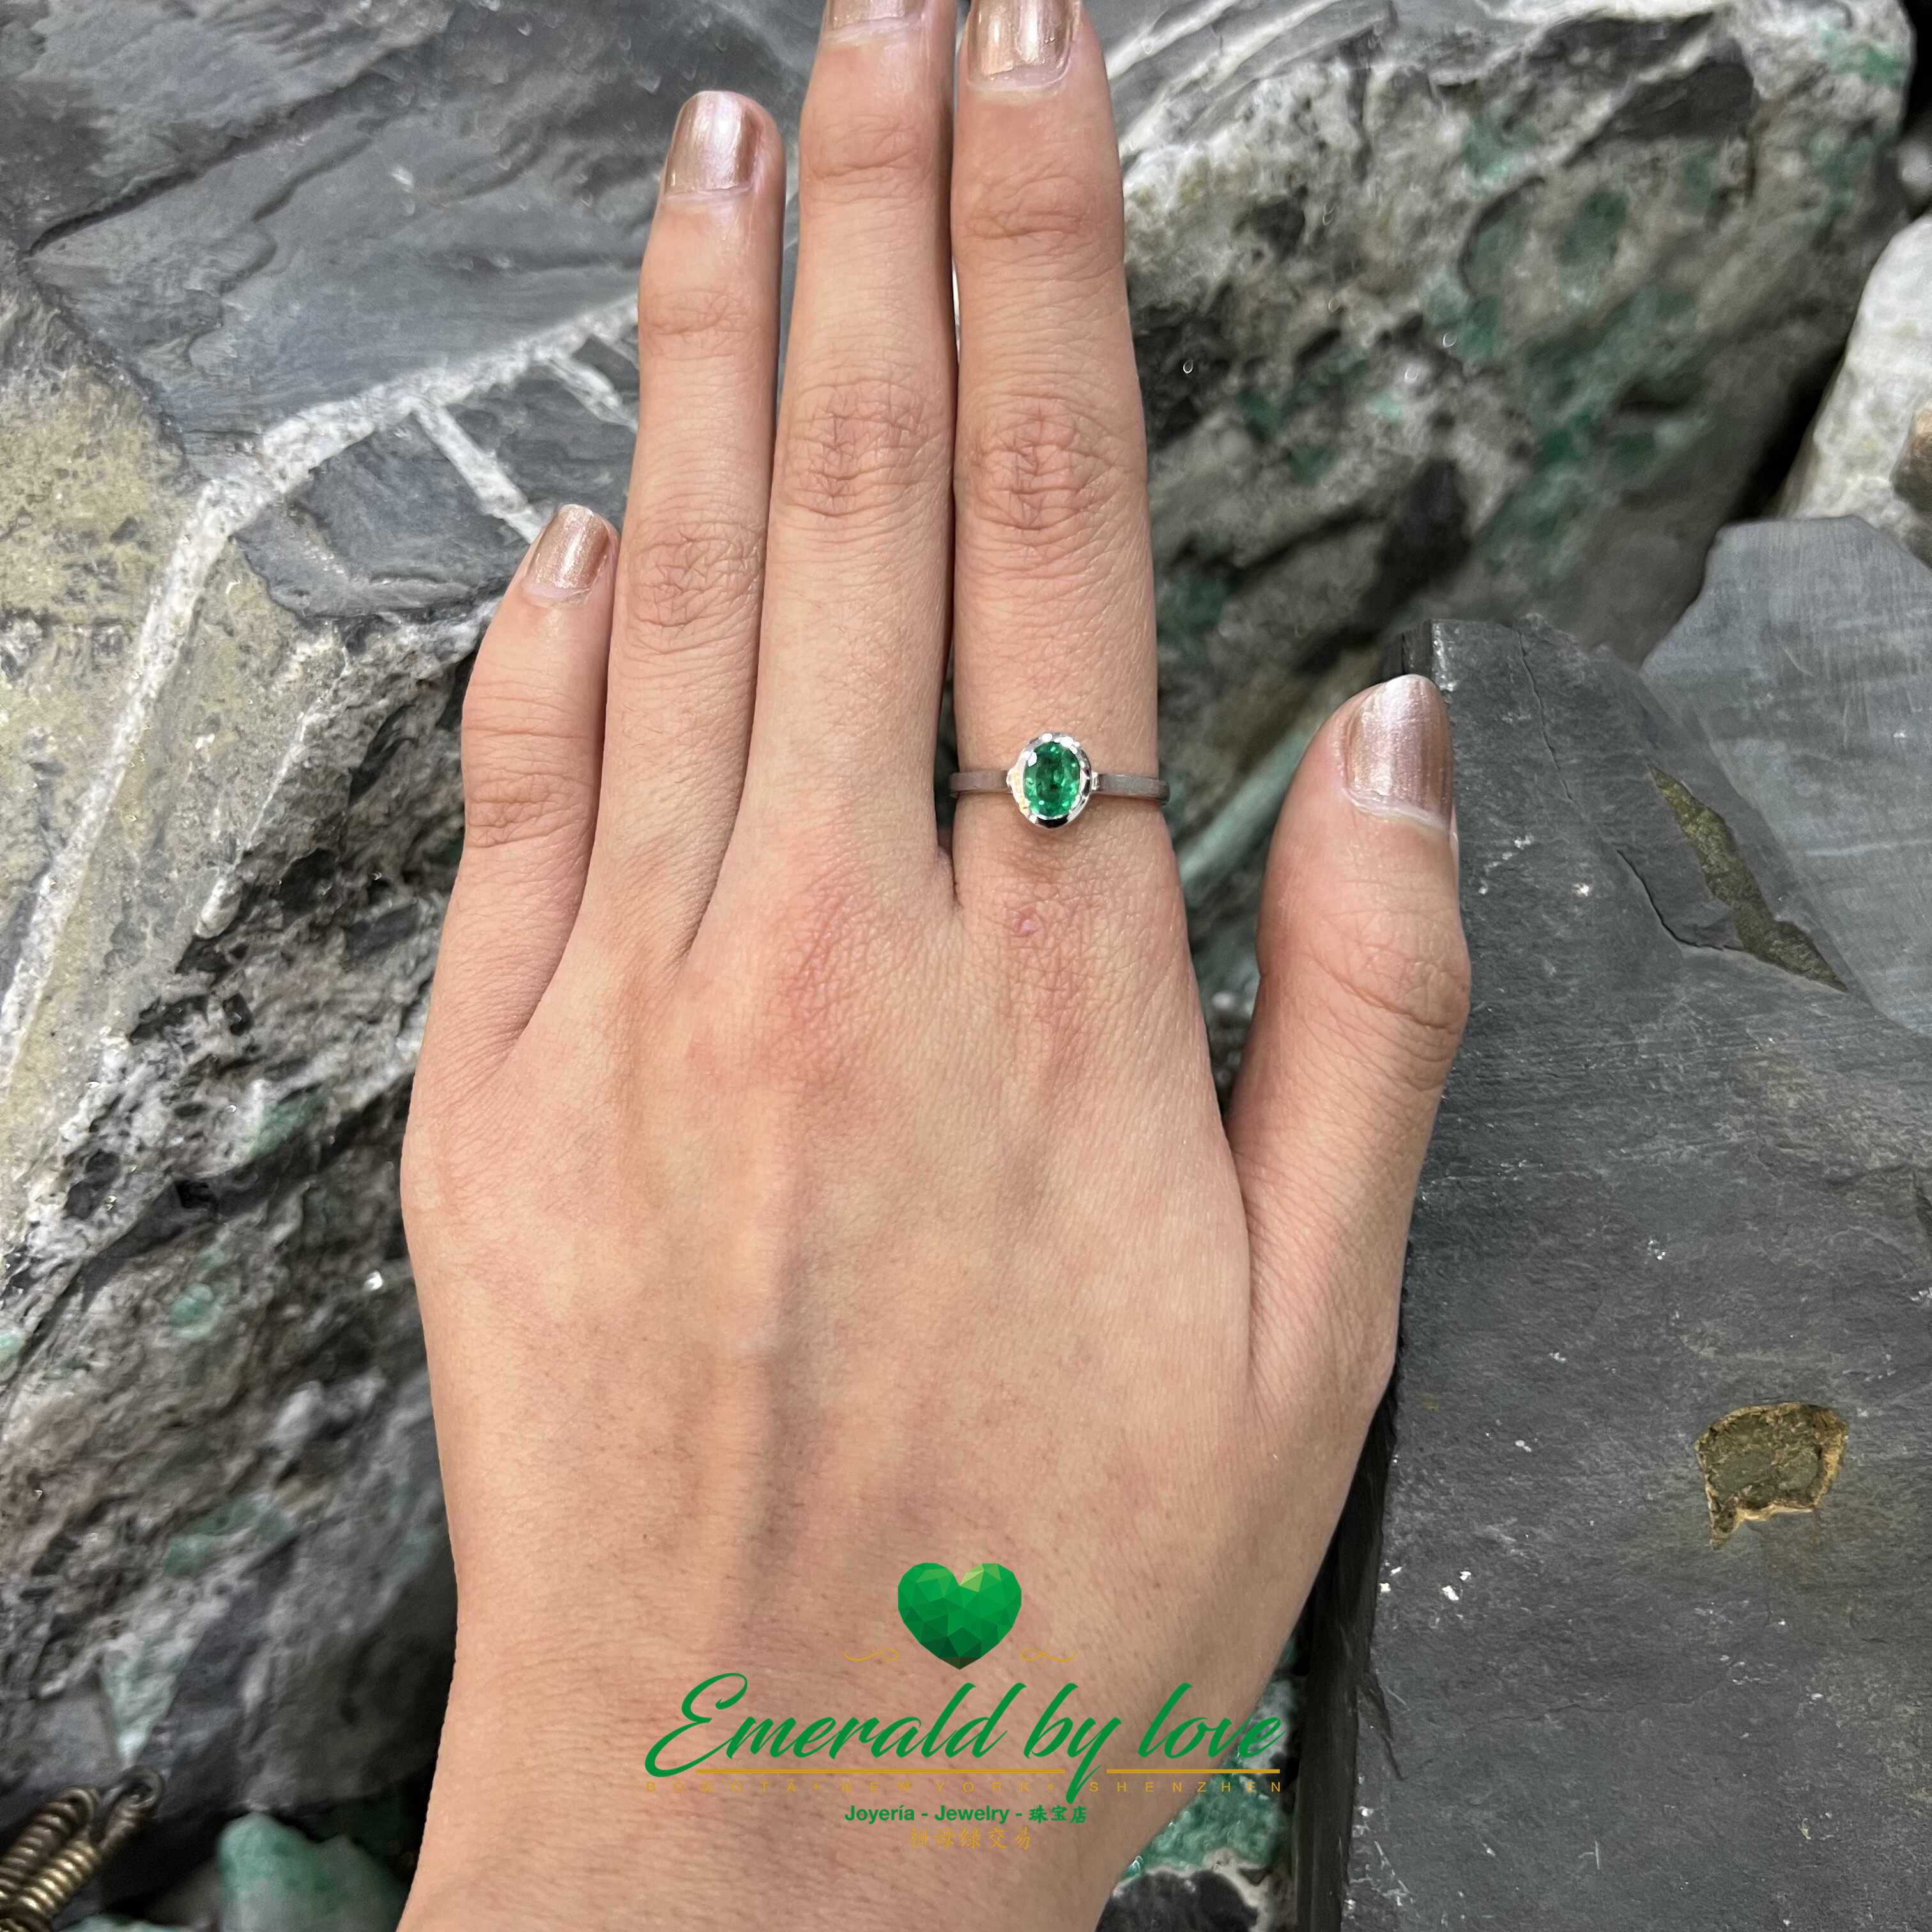 Exquisite White Gold Ring: Oval Emerald